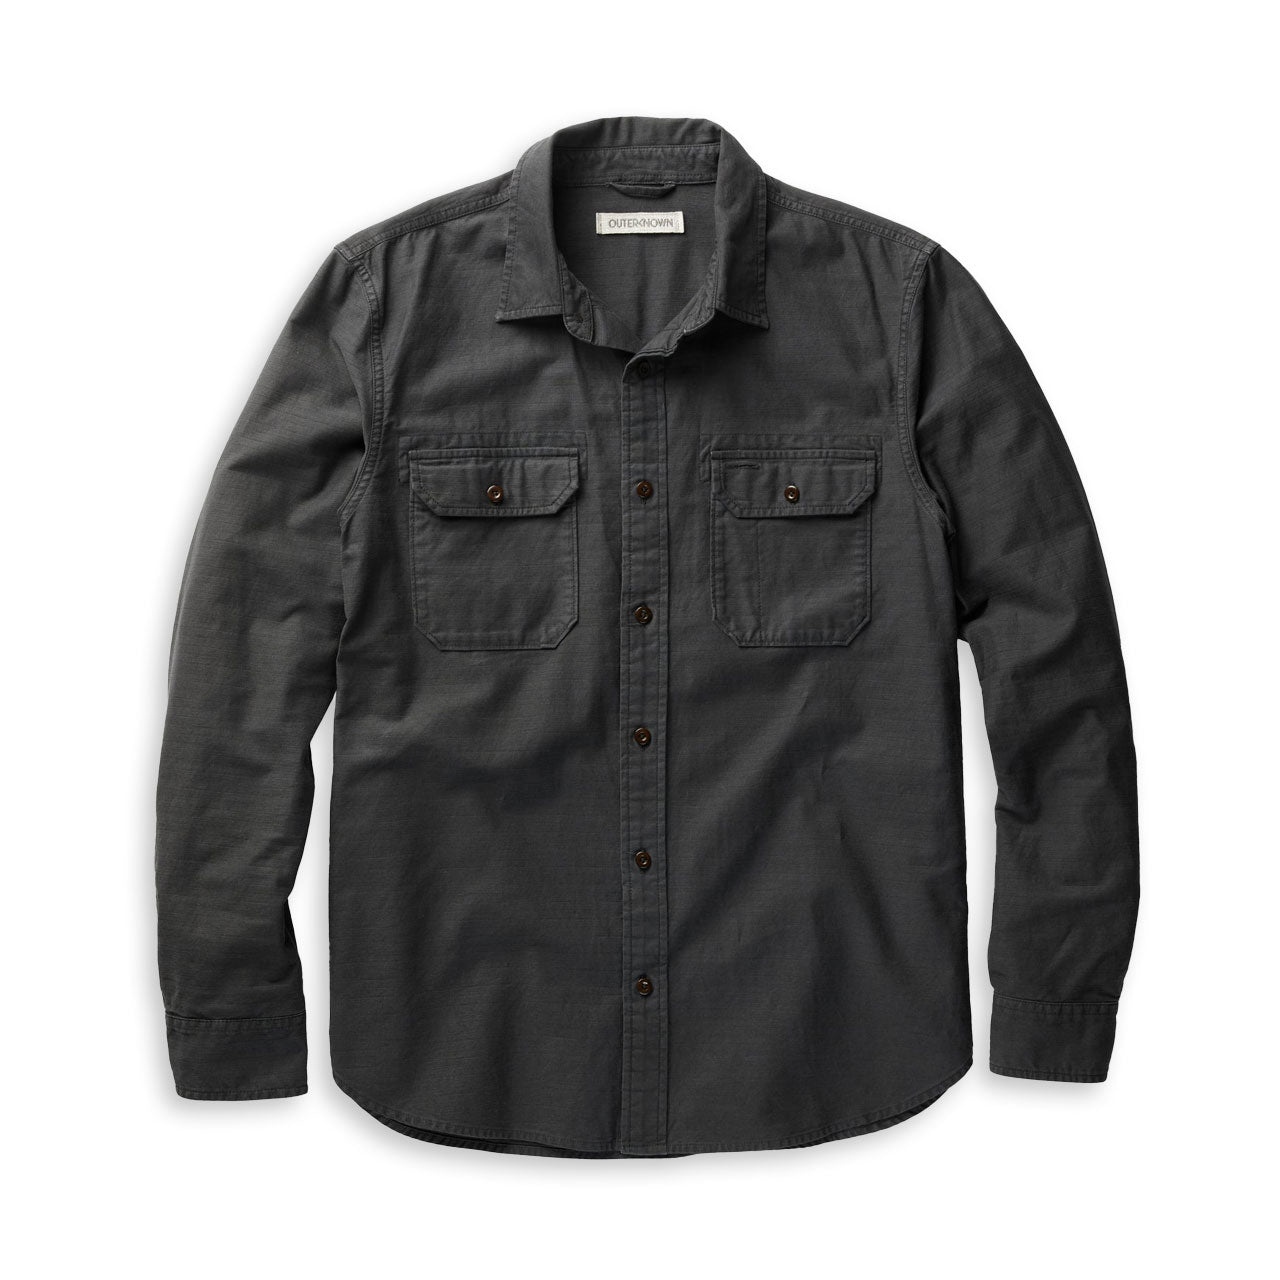 Outerknown Utilitarian Shirt | Uncrate Supply